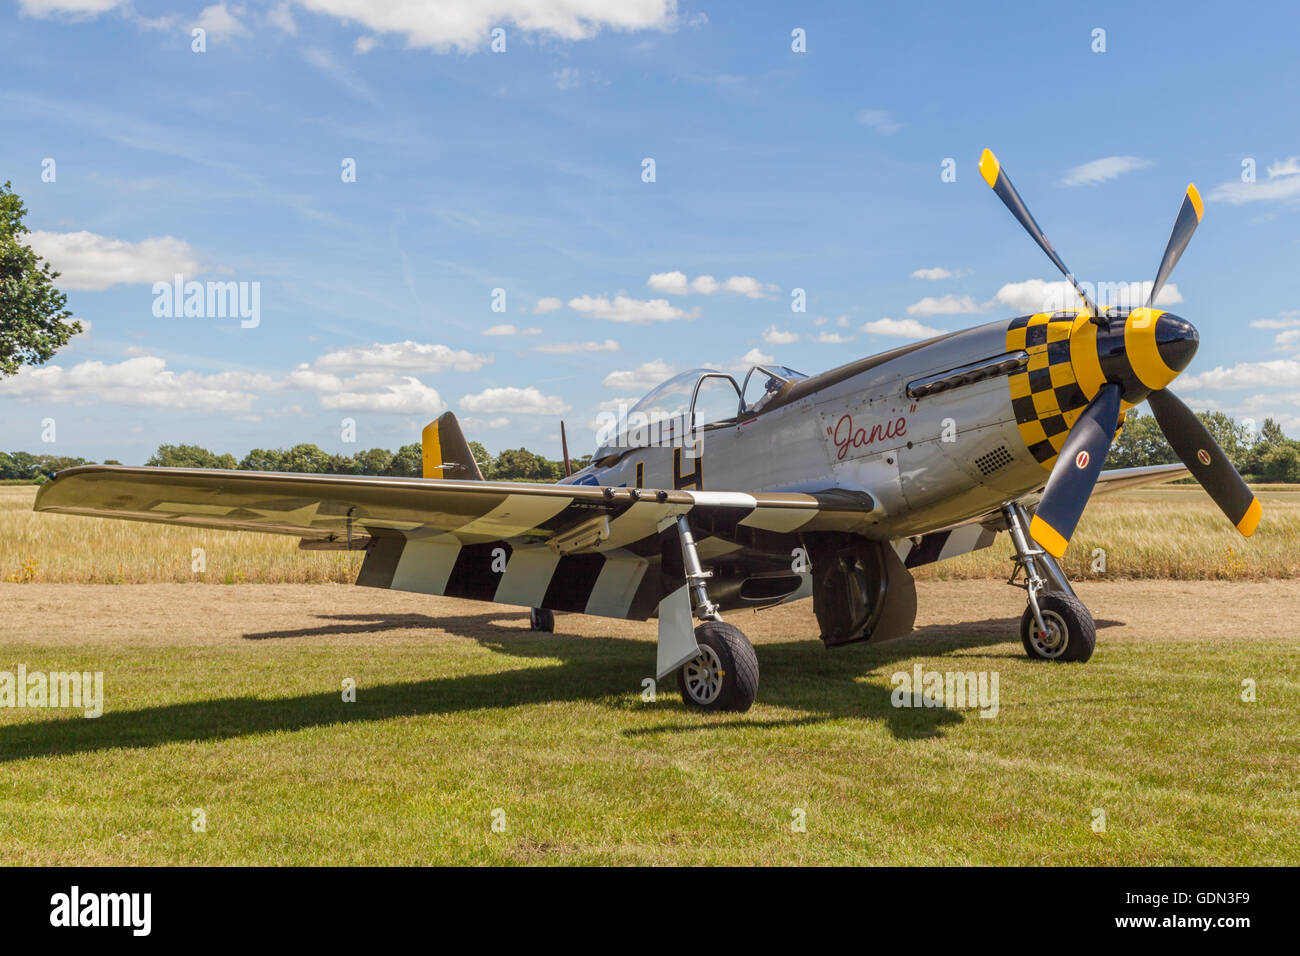 Restored airworthy P-51D Mustang American fighter aeroplane at the hardwick warbirds hardwick airfield Stock Photo